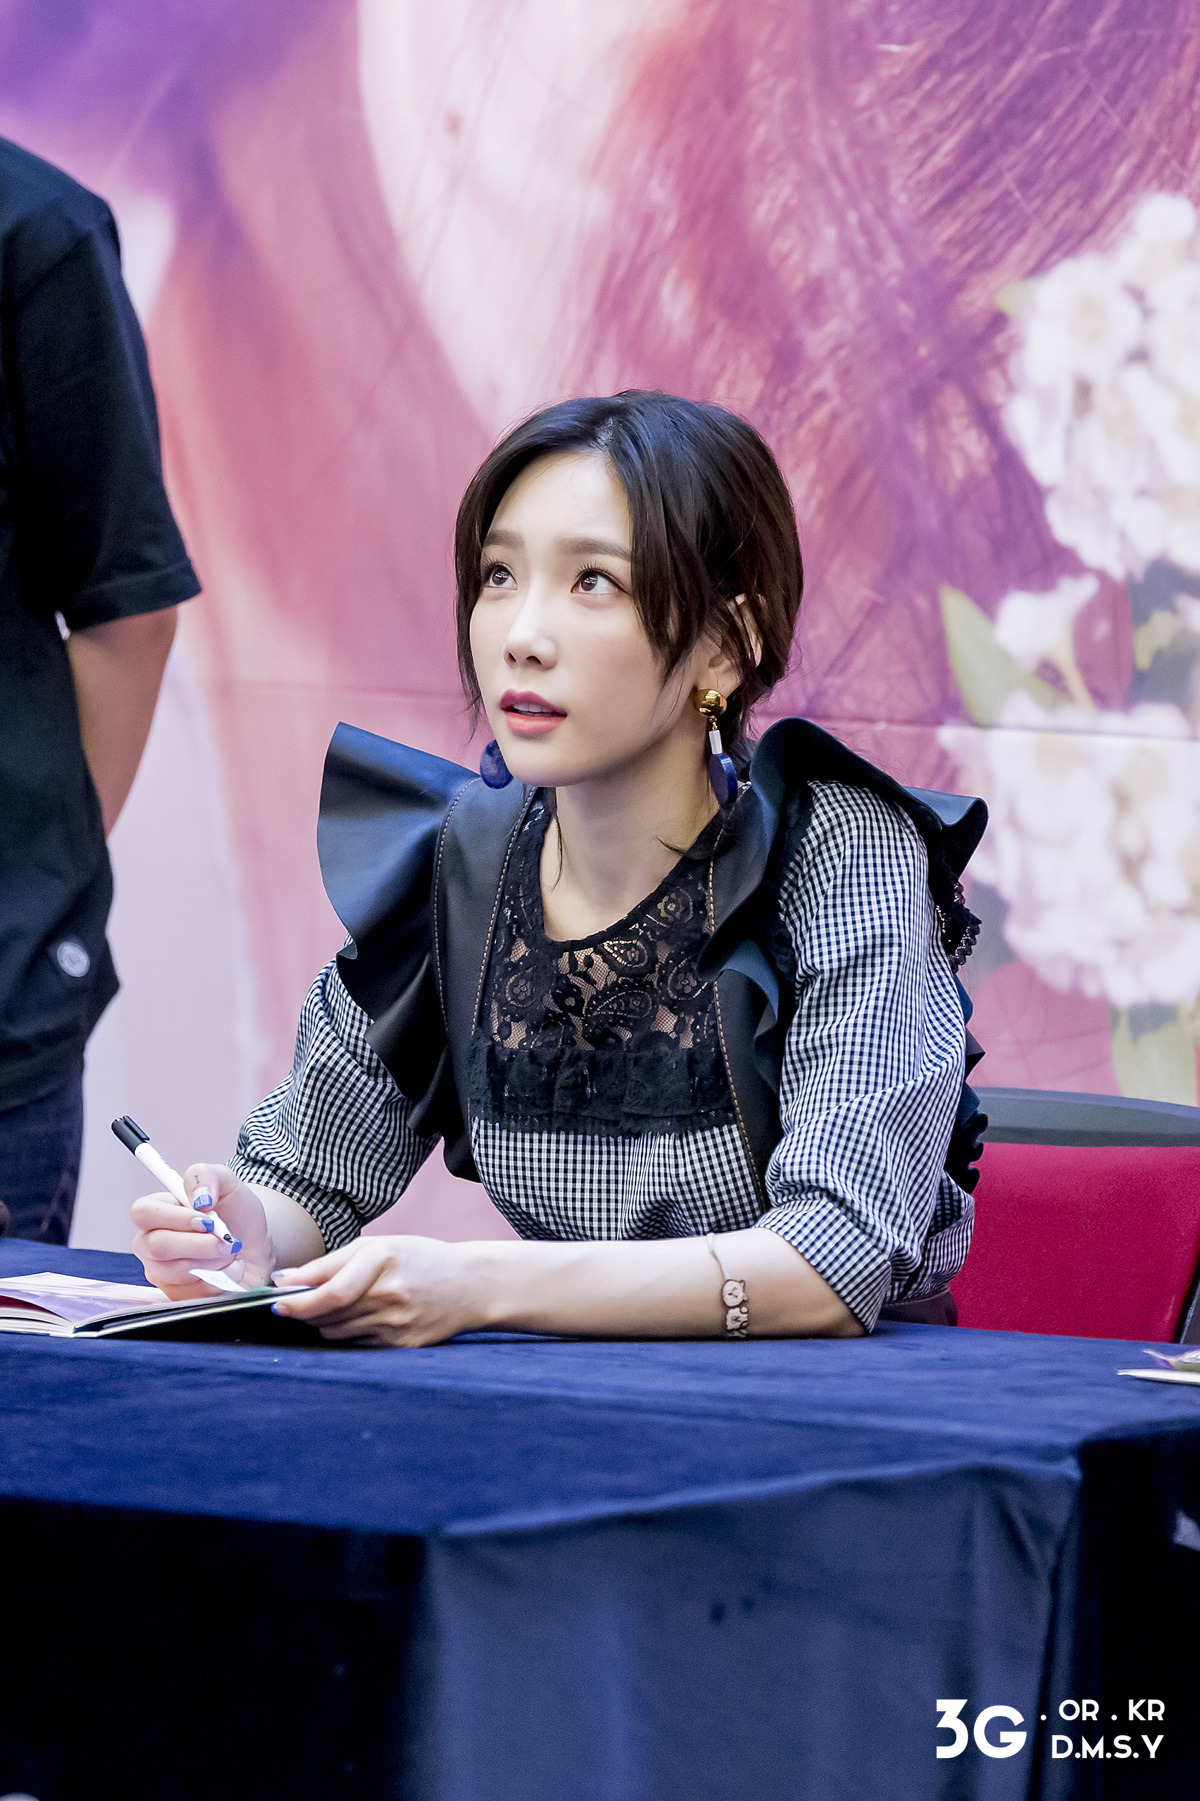 [PIC][16-04-2017]TaeYeon tham dự buổi Fansign cho “MY VOICE DELUXE EDITION” tại AK PLAZA vào chiều nay  - Page 5 264C344558FDD8EB34AF55